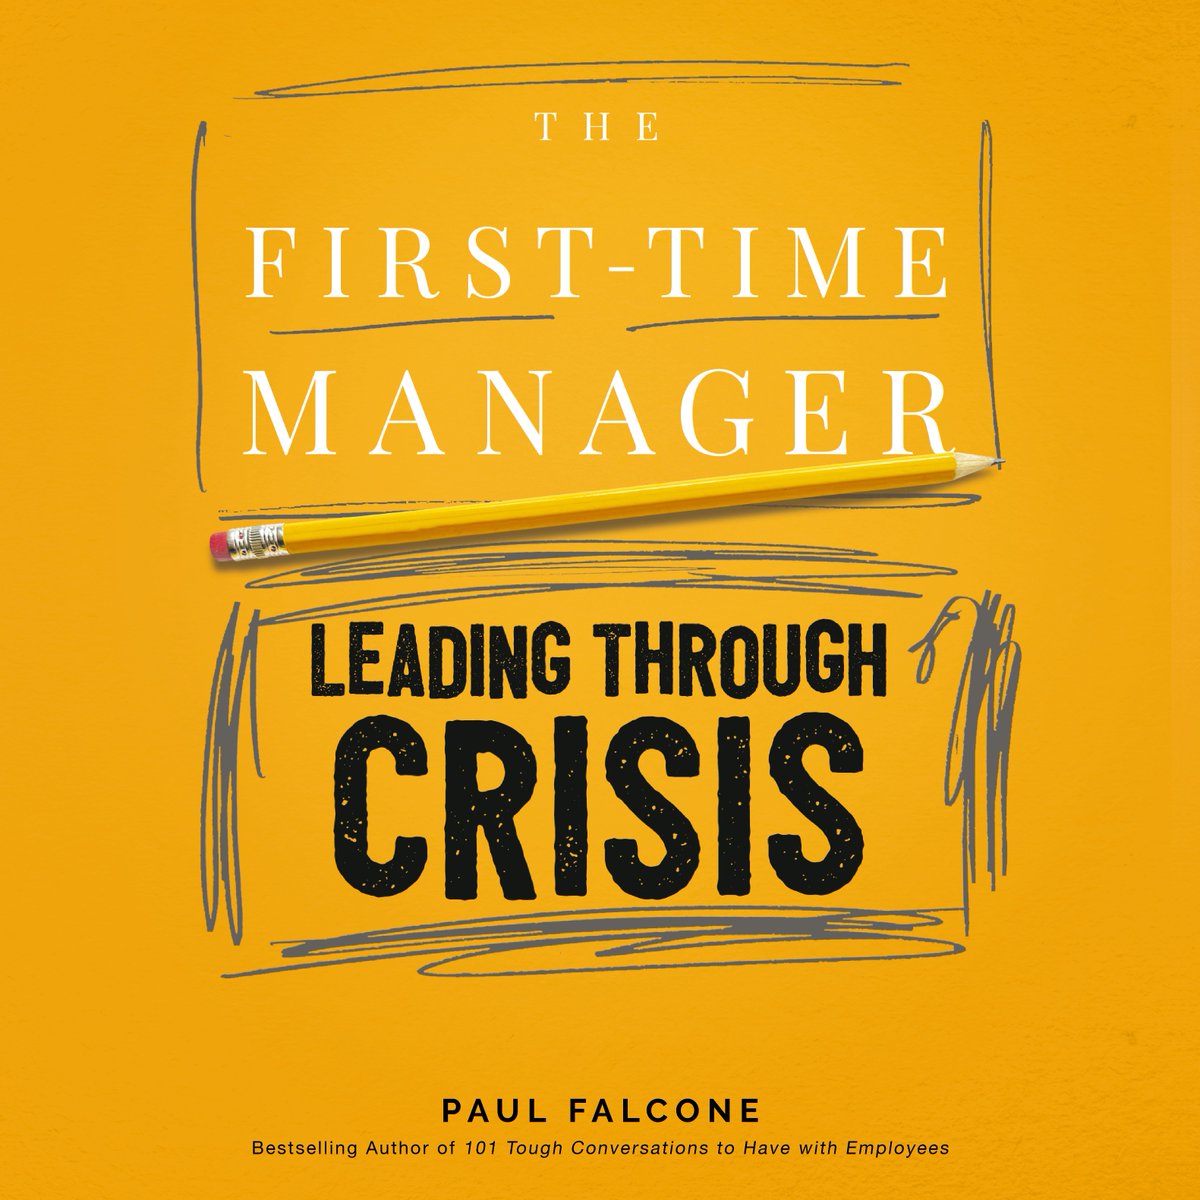 'The First Time Manager ' is a go-to guide for sales managers that has sold over 500,000 copies. And now there are two new books in the series - 'First Time Manager: Sales' and 'First Time Manager: Leading Through Crisis'. Click to learn more! bit.ly/45TvM7v